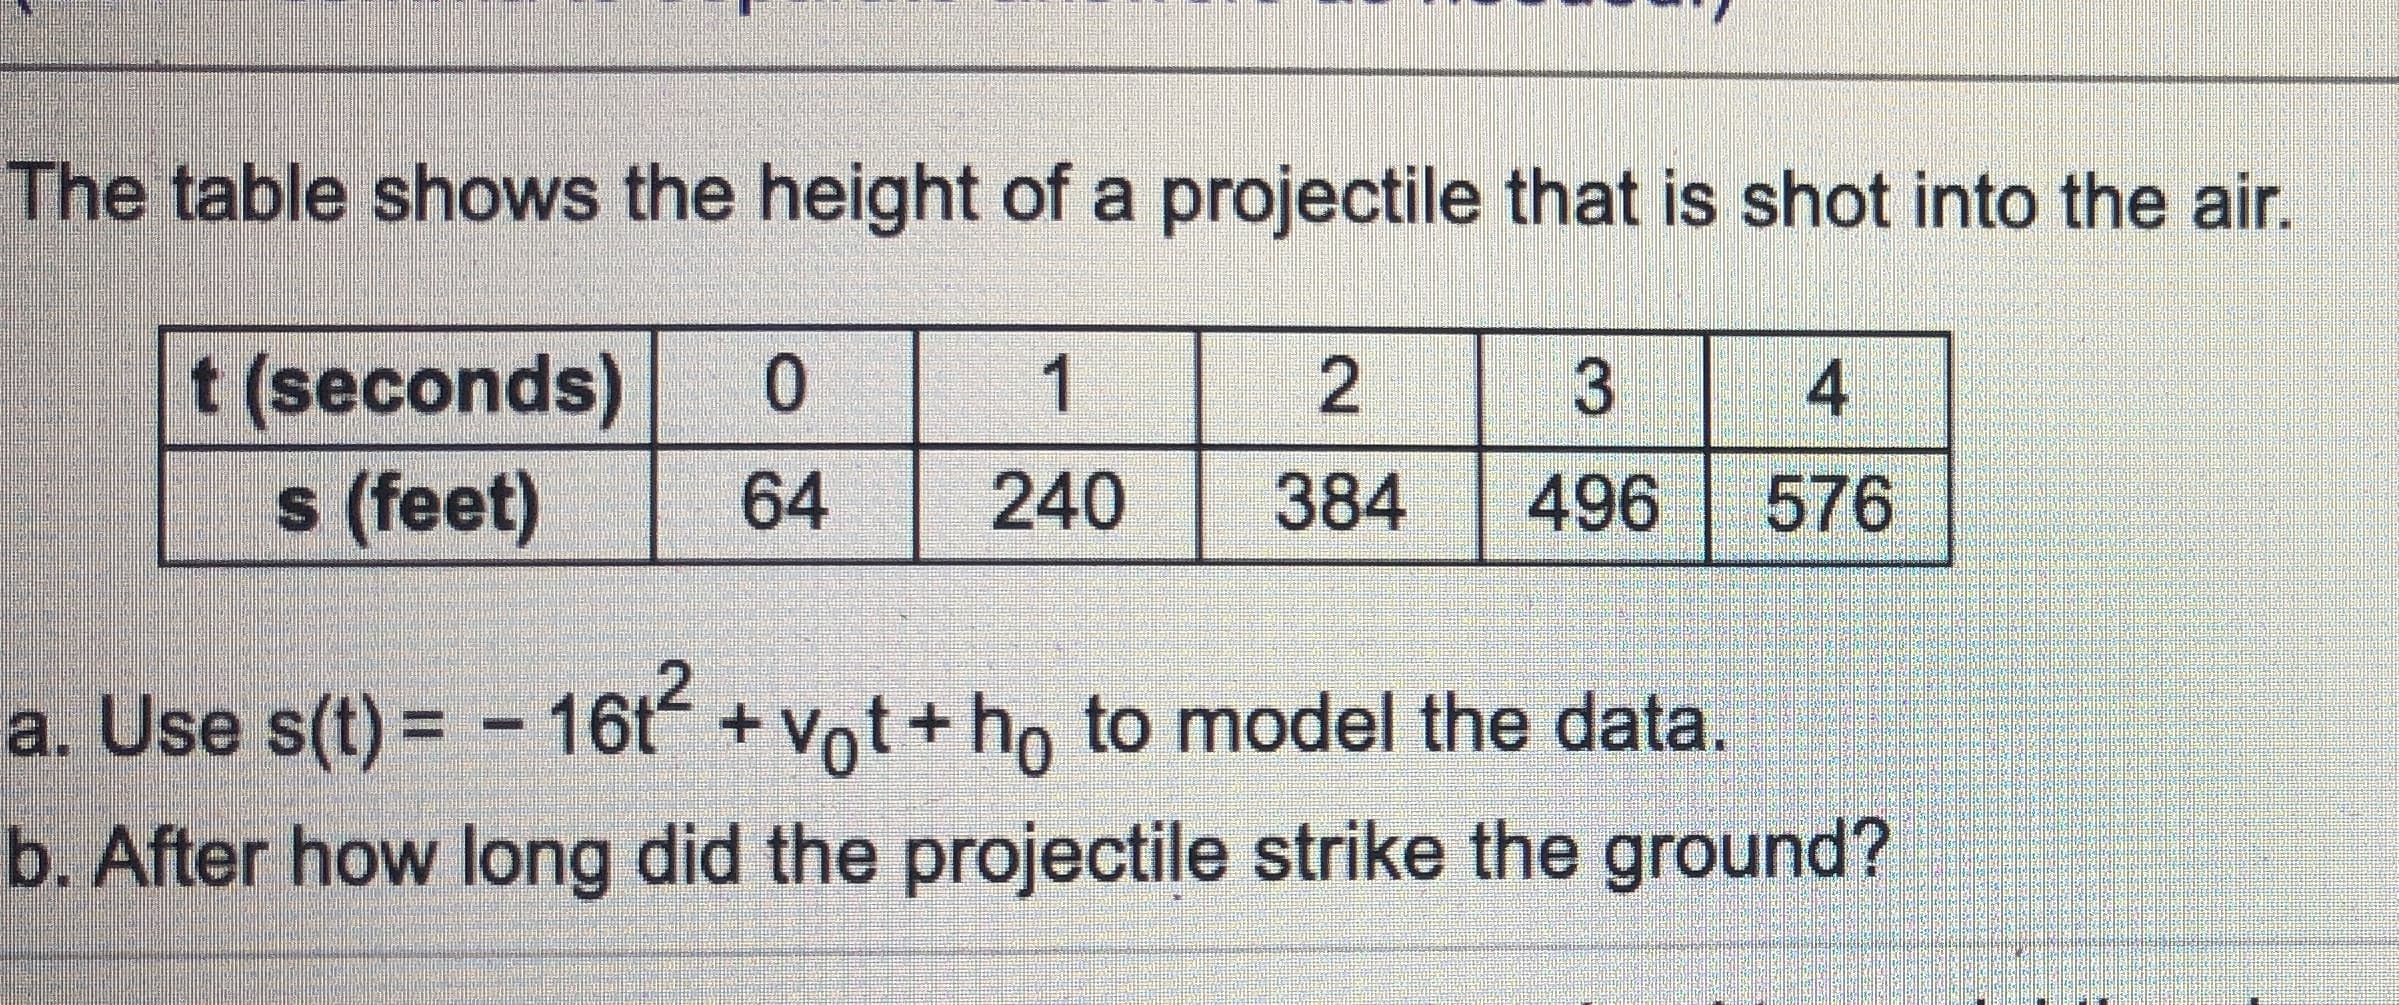 The table shows the height of a projectile that is shot into the air.
t (seconds)
s (feet)
0.
1
3
64
240
384
496
576
a. Use s(t) = - 16t + Vot+ho to model the data.
b. After how long did the projectile strike the ground?
